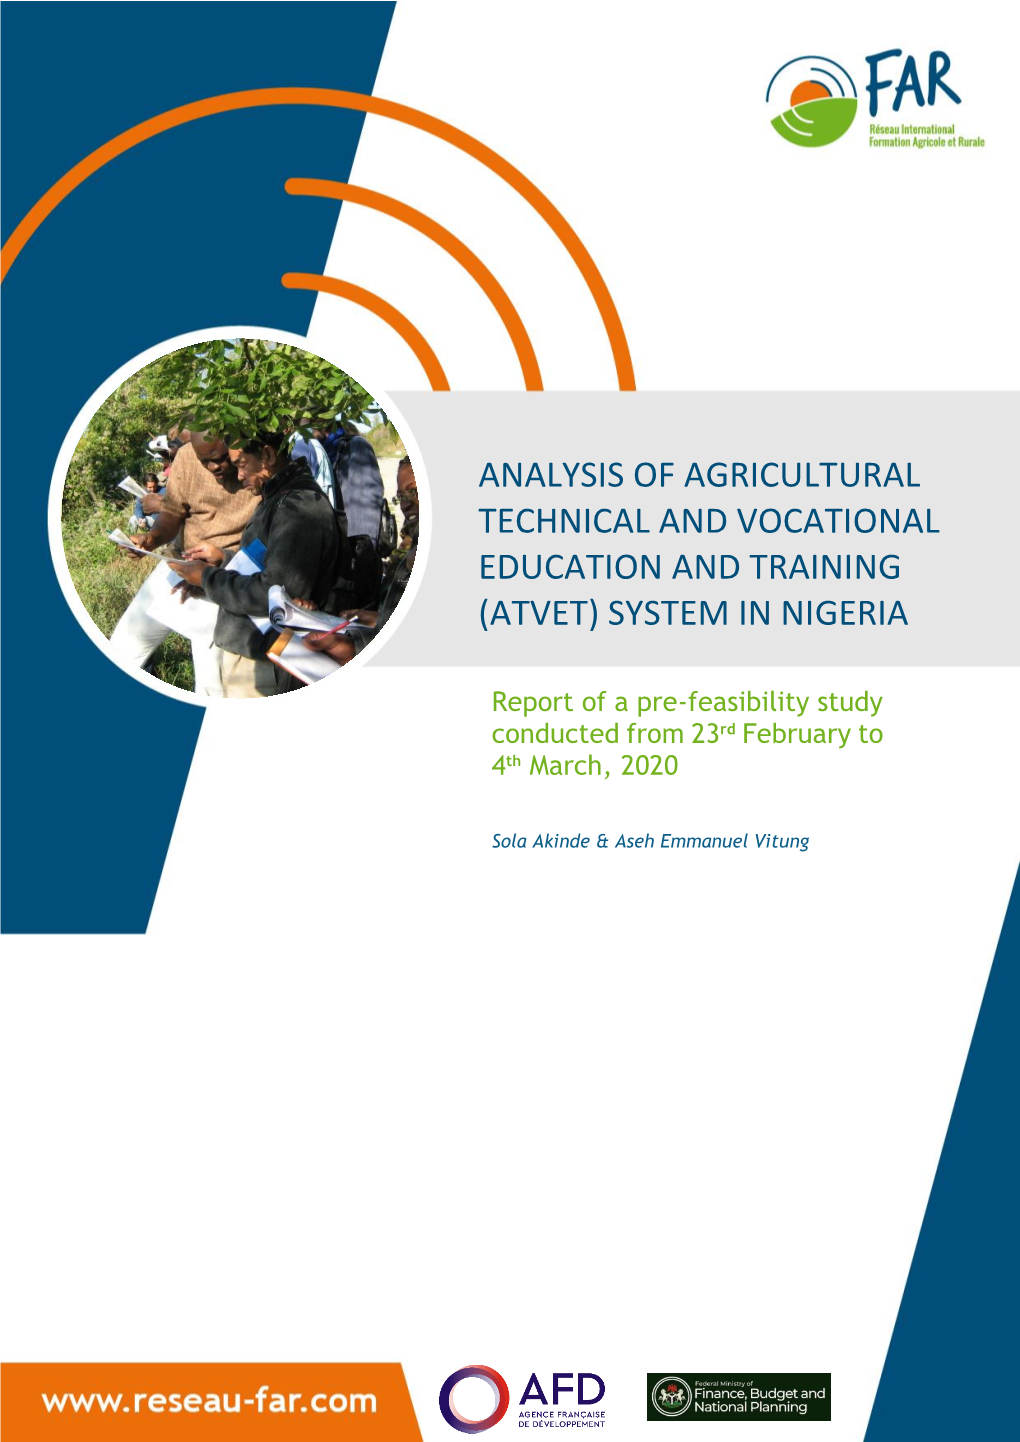 Analysis of Agricultural Technical and Vocational Education and Training (Atvet) System in Nigeria